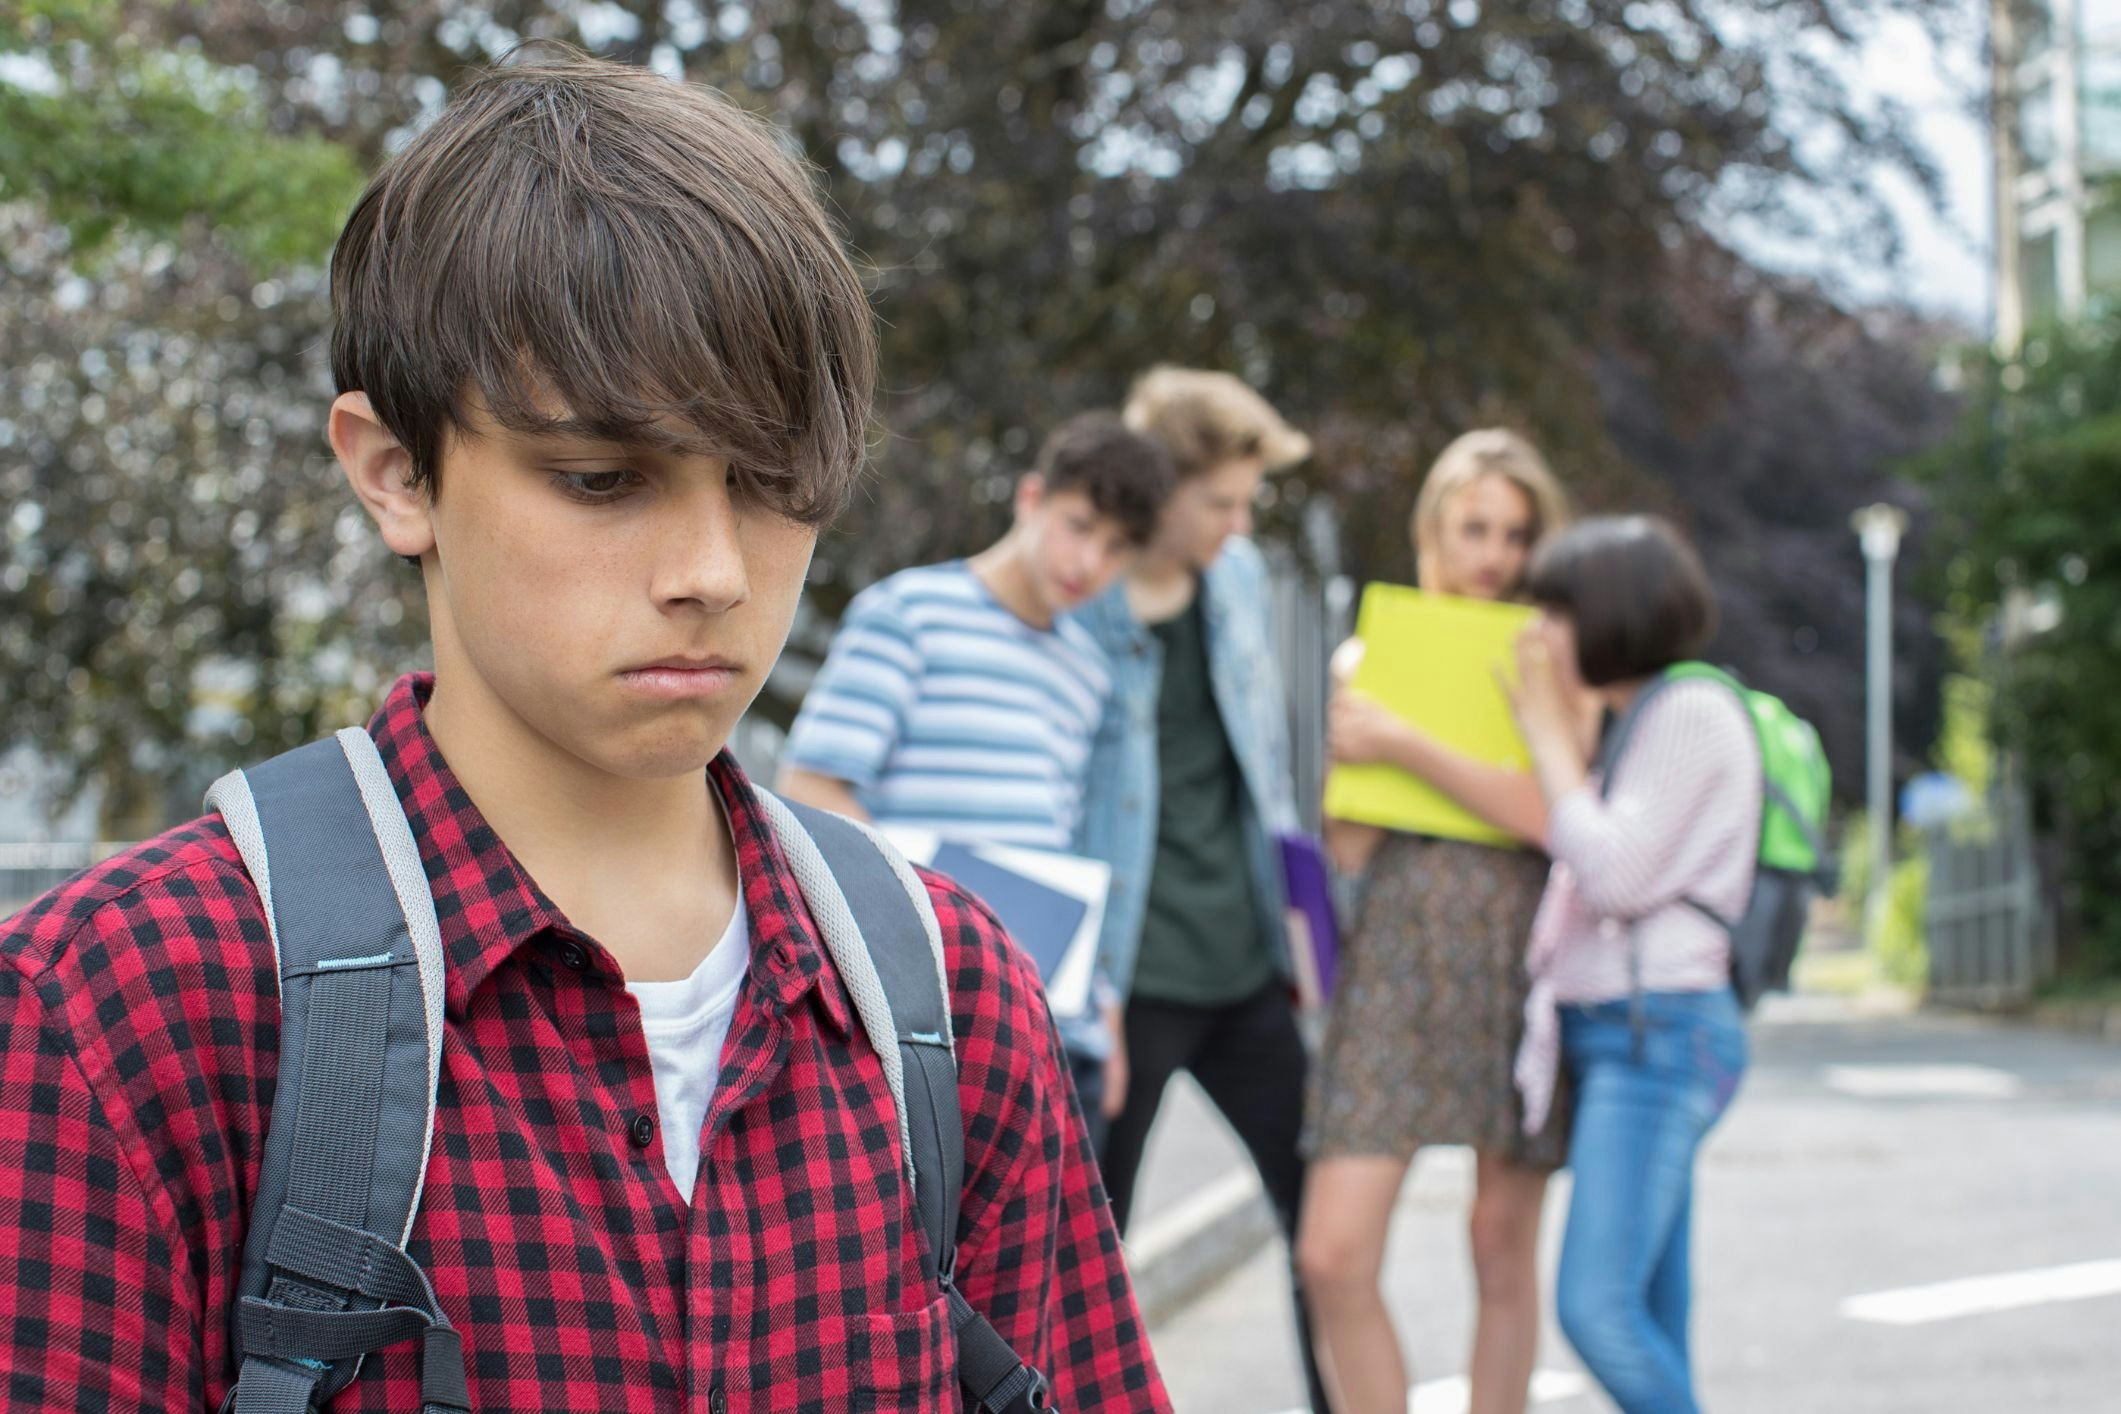 Online bullying can affect anyone, but recent data suggests that young people with disability are at greater risk of online abuse than peers without disability. [Source: Shutterstock]
